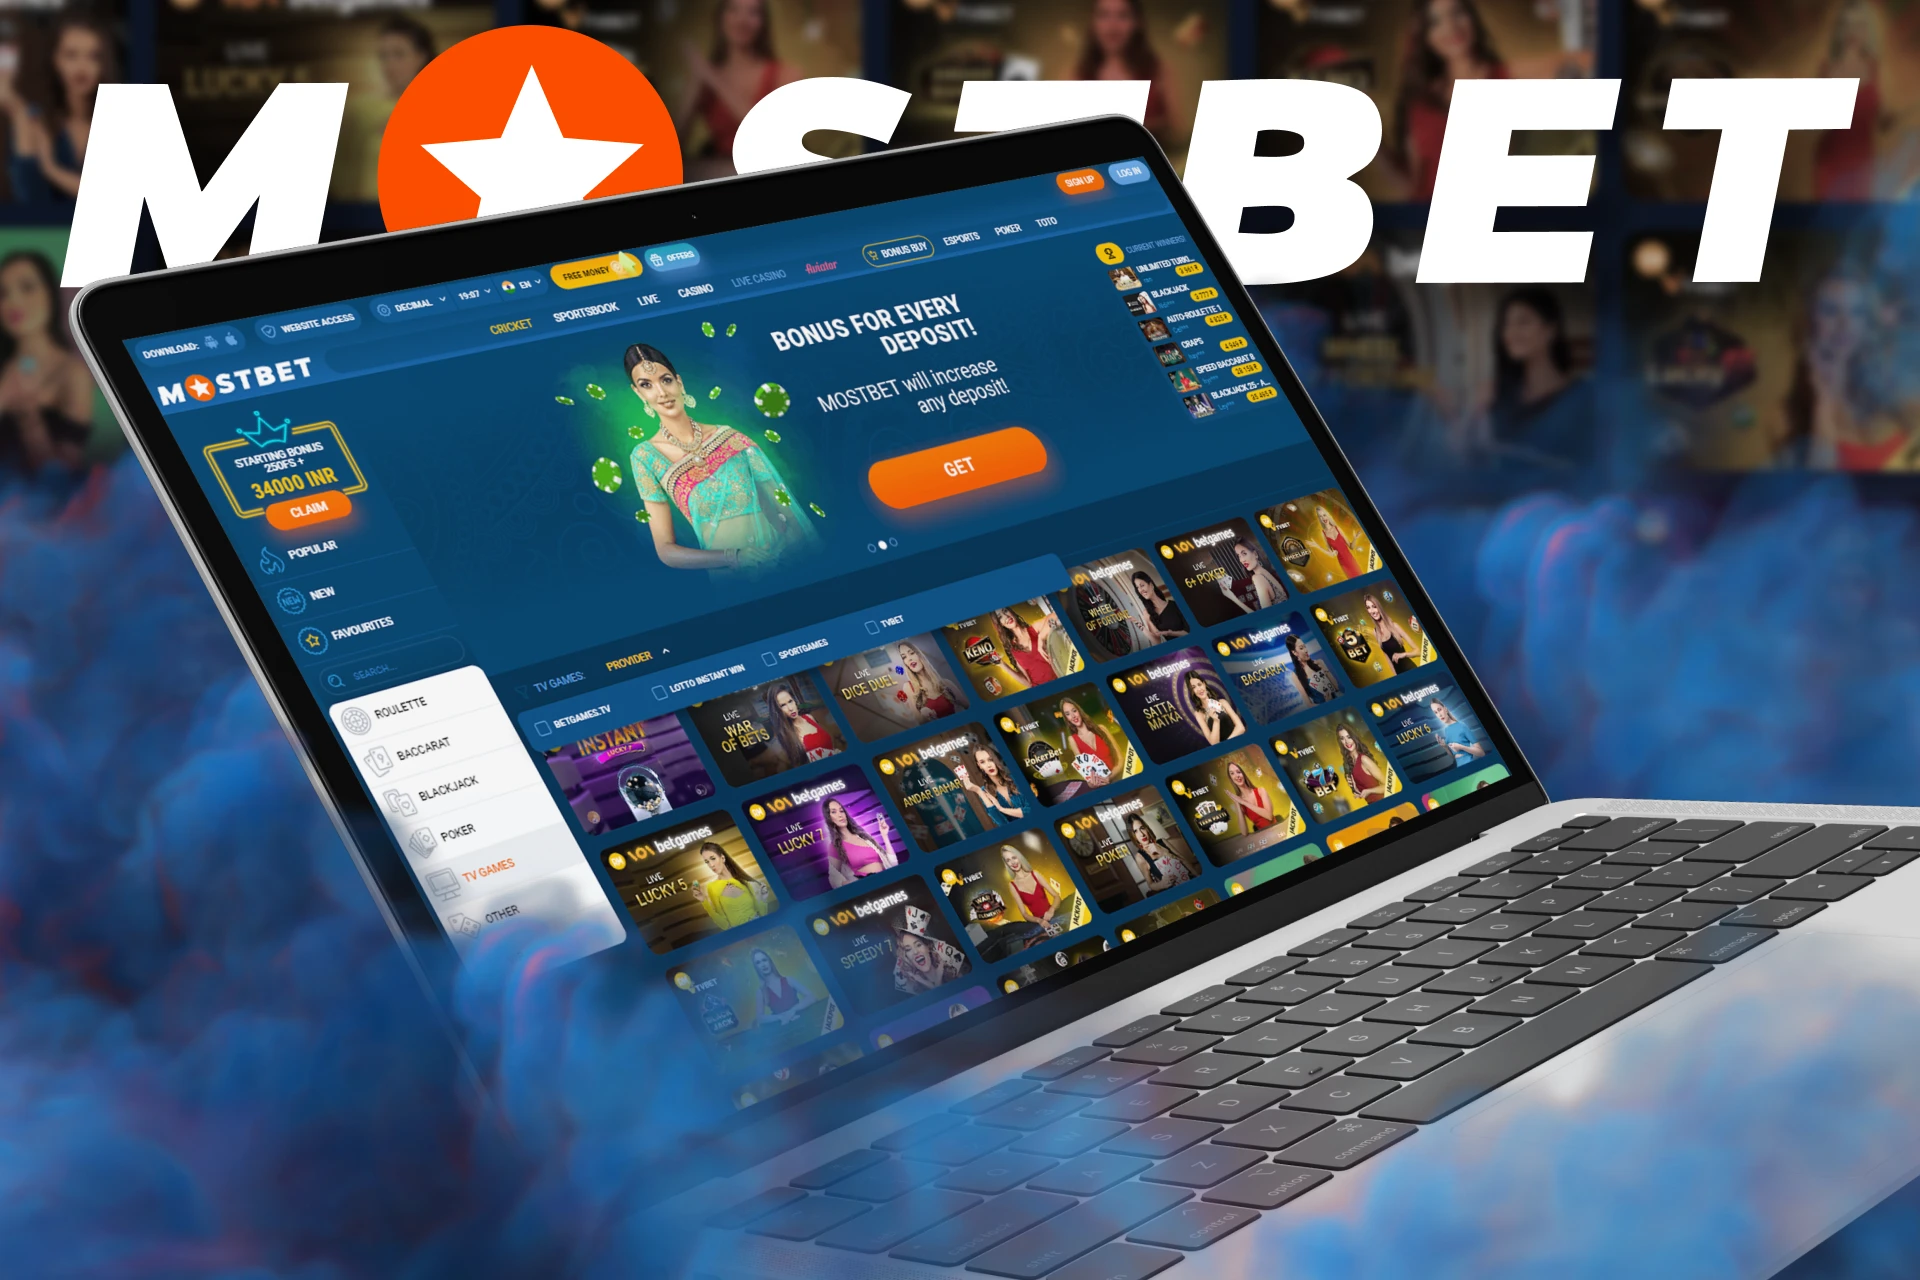 Reliable providers in Mostbet, choose which providers to play.